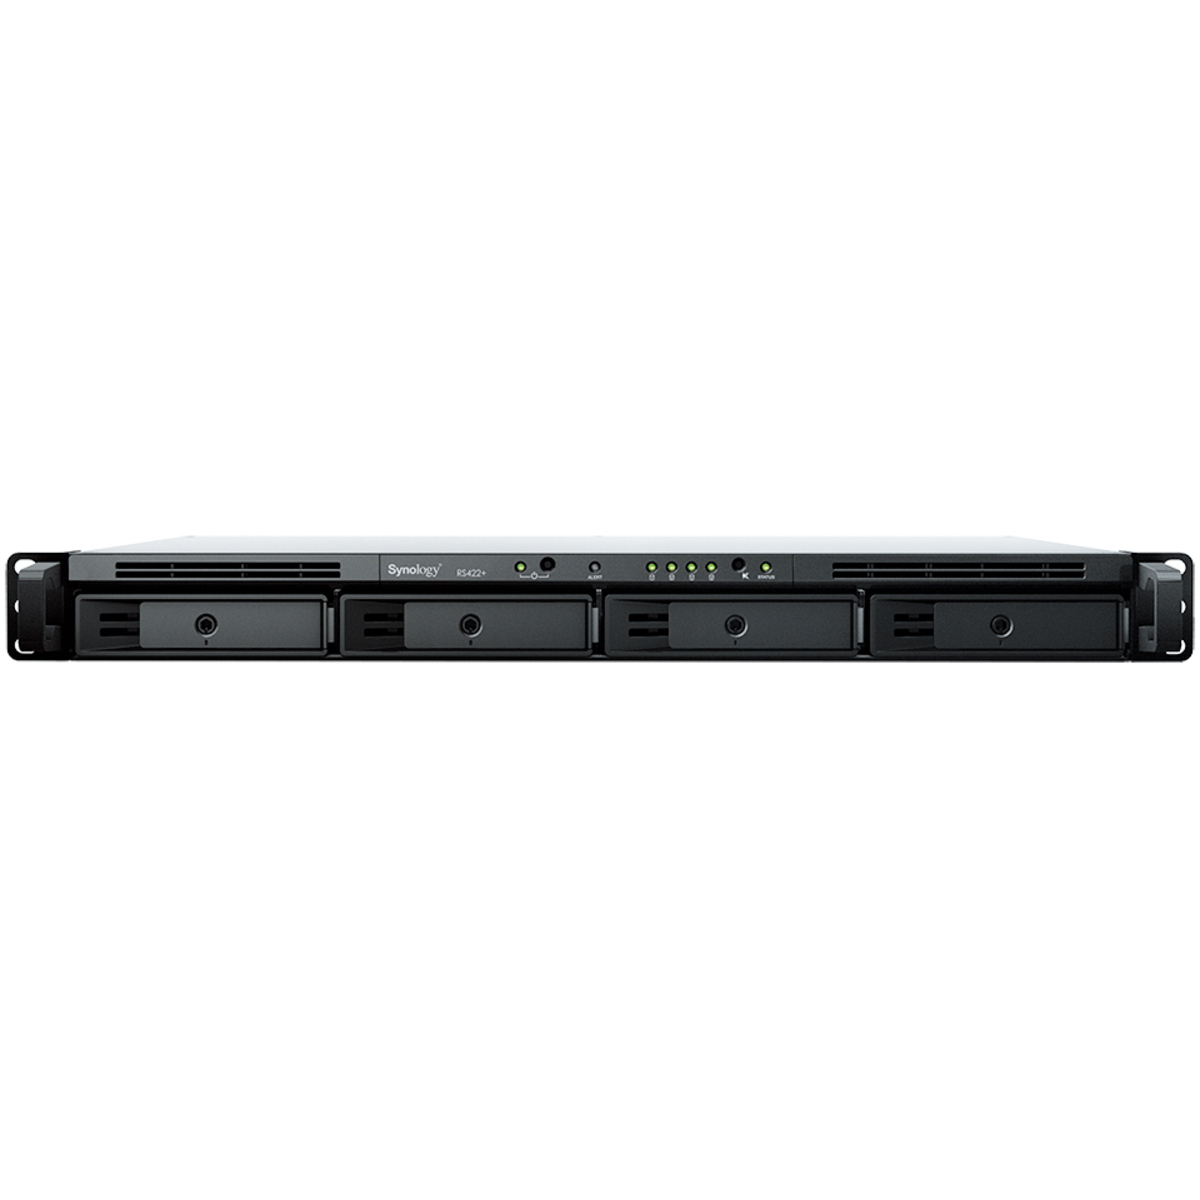 Synology RackStation RS422+ 32tb 4-Bay RackMount Personal / Basic Home / Small Office NAS - Network Attached Storage Device 4x8tb TeamGroup EX2 Elite T253E2008T0C101 2.5 550/520MB/s SATA 6Gb/s SSD CONSUMER Class Drives Installed - Burn-In Tested RackStation RS422+